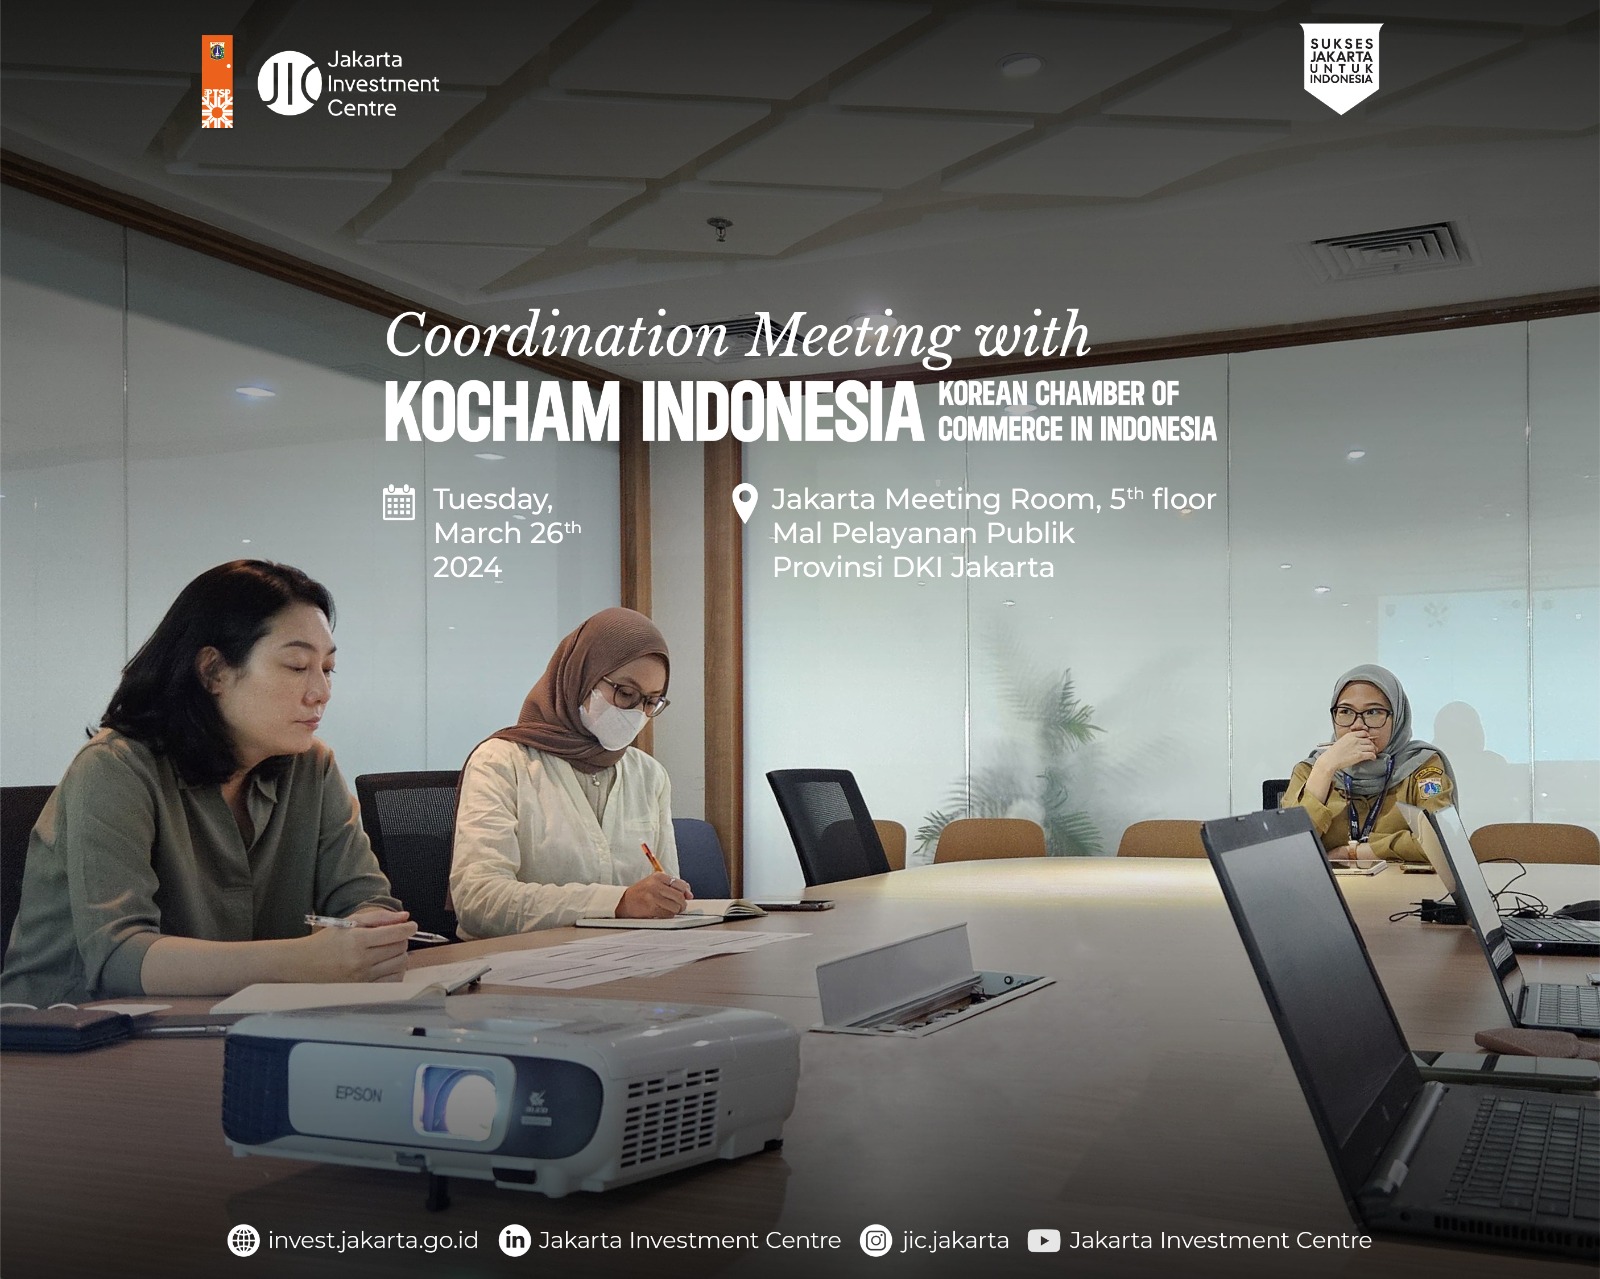 Coordination Meeting with KOCHAM Indonesia (Korean Chamber of Commerce in Indonesia)